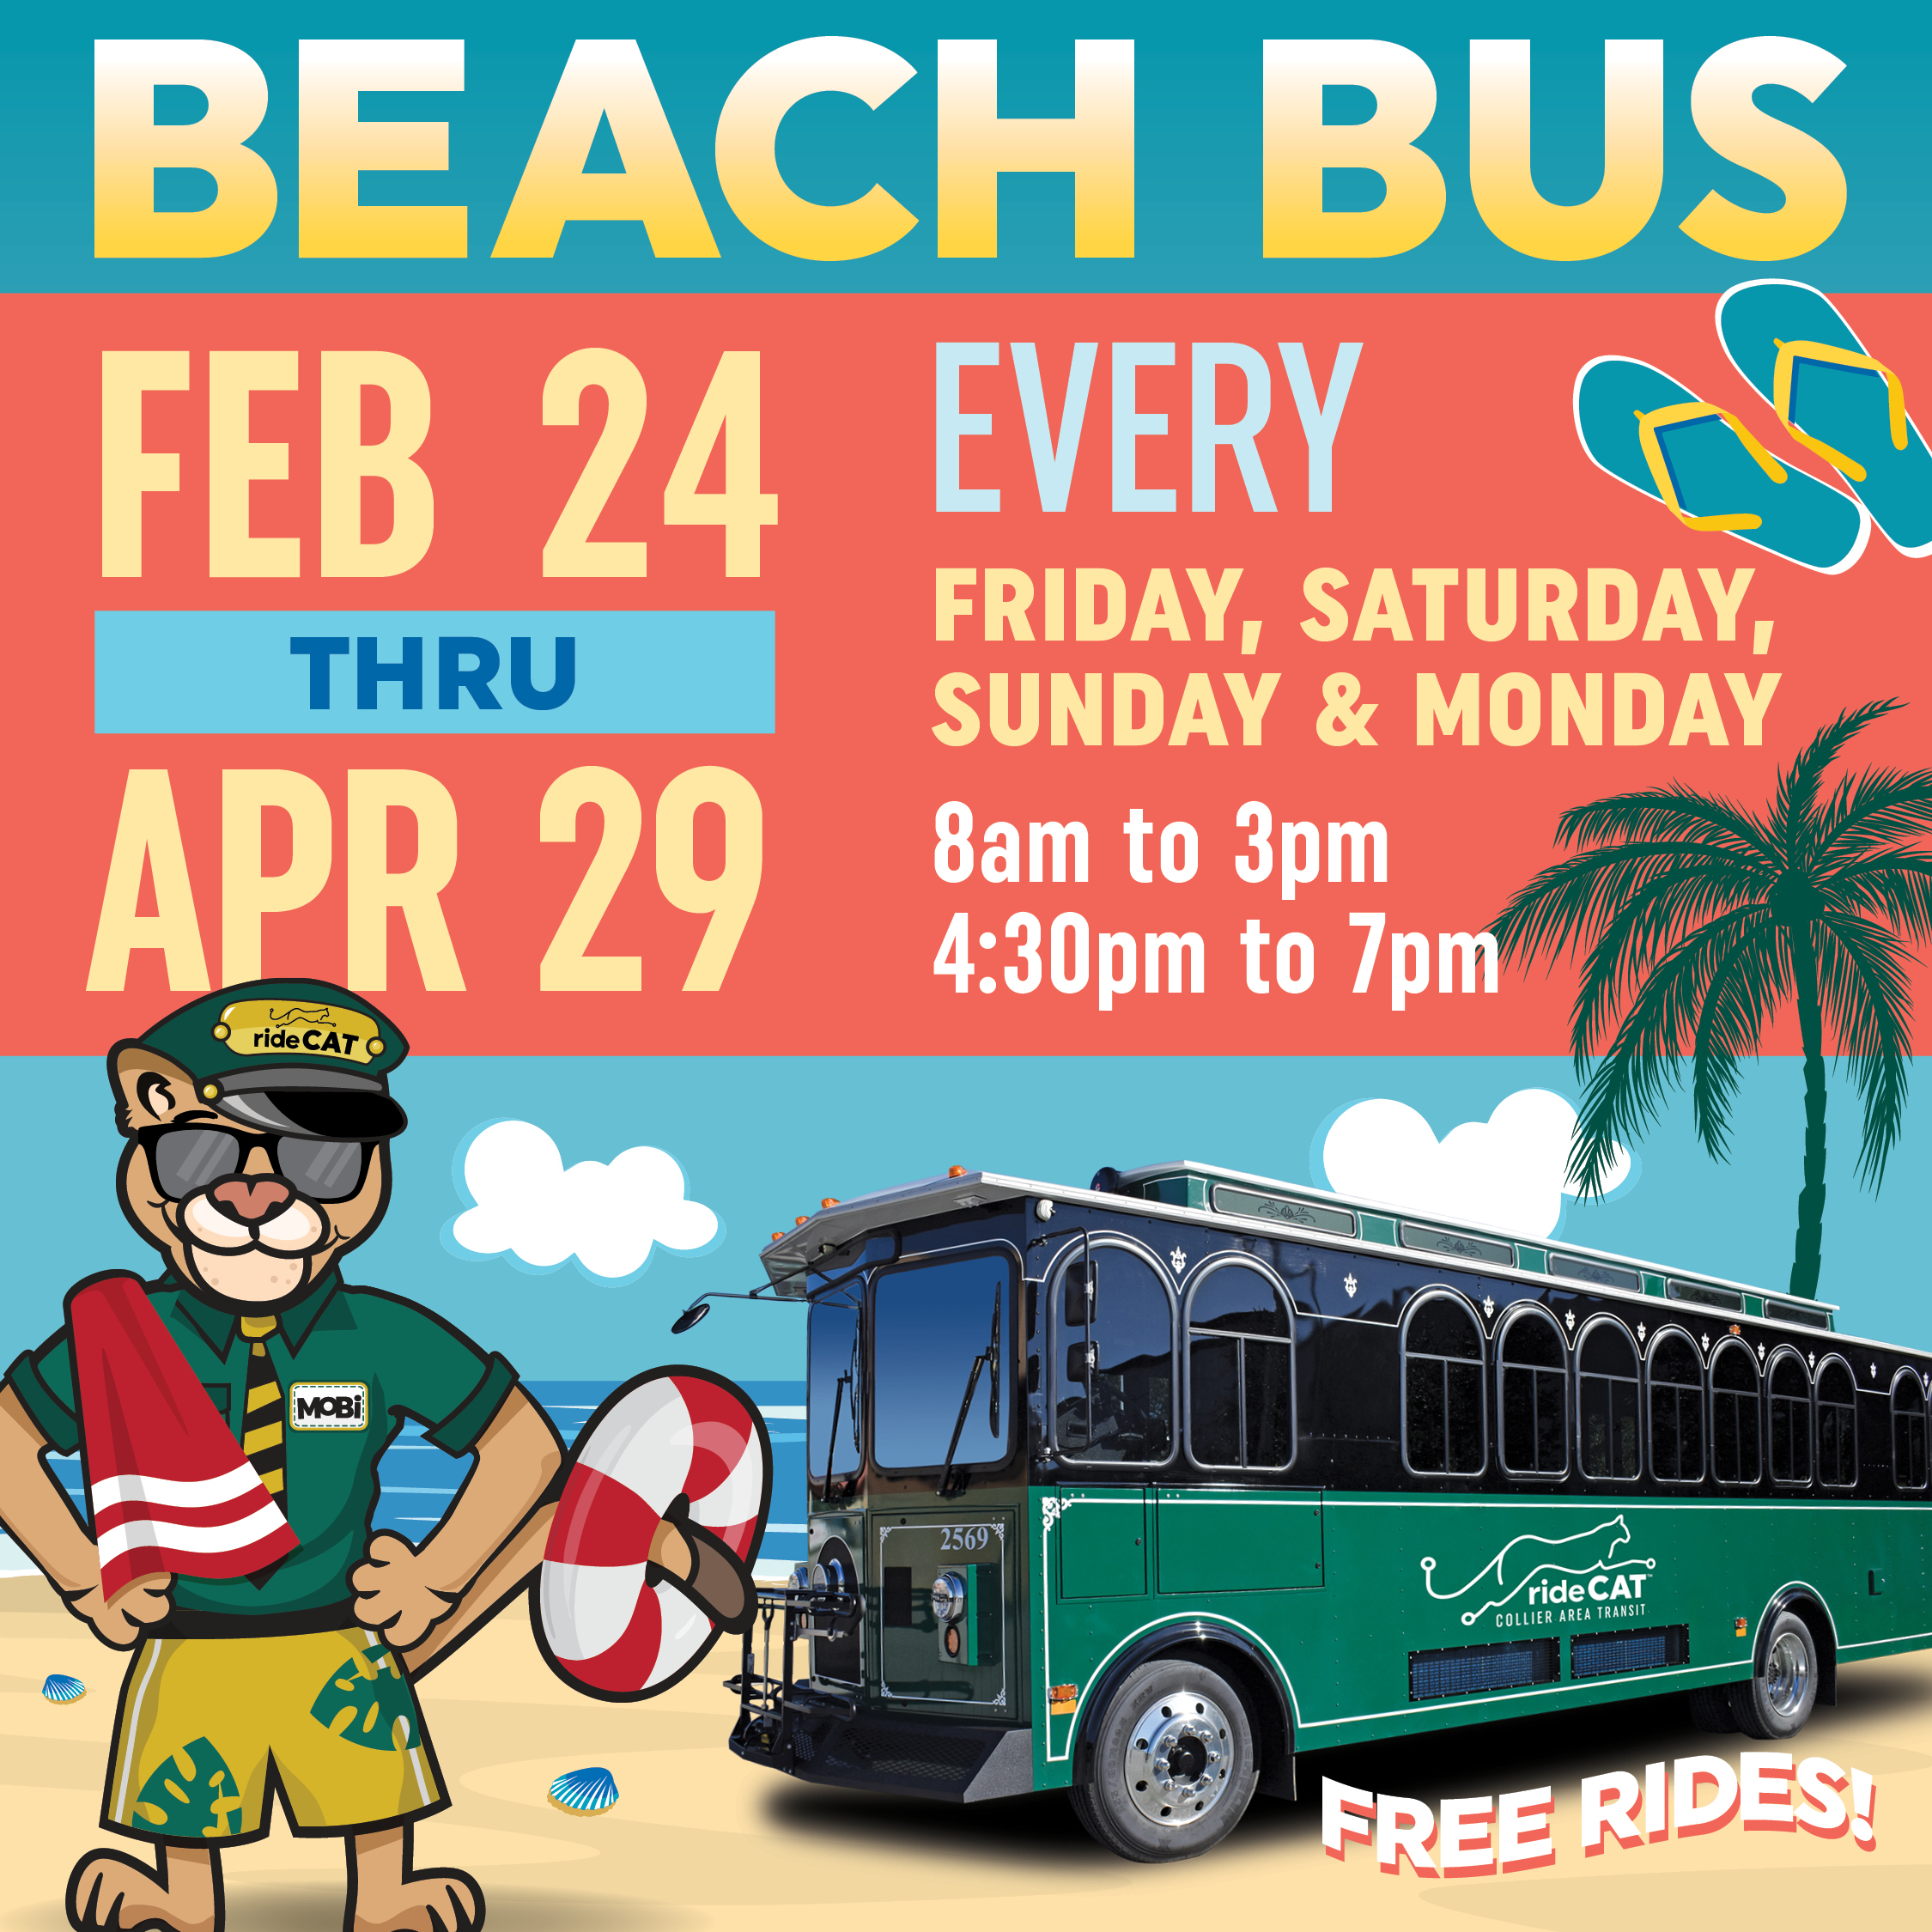 CAT’s Beach Bus is Running for the season